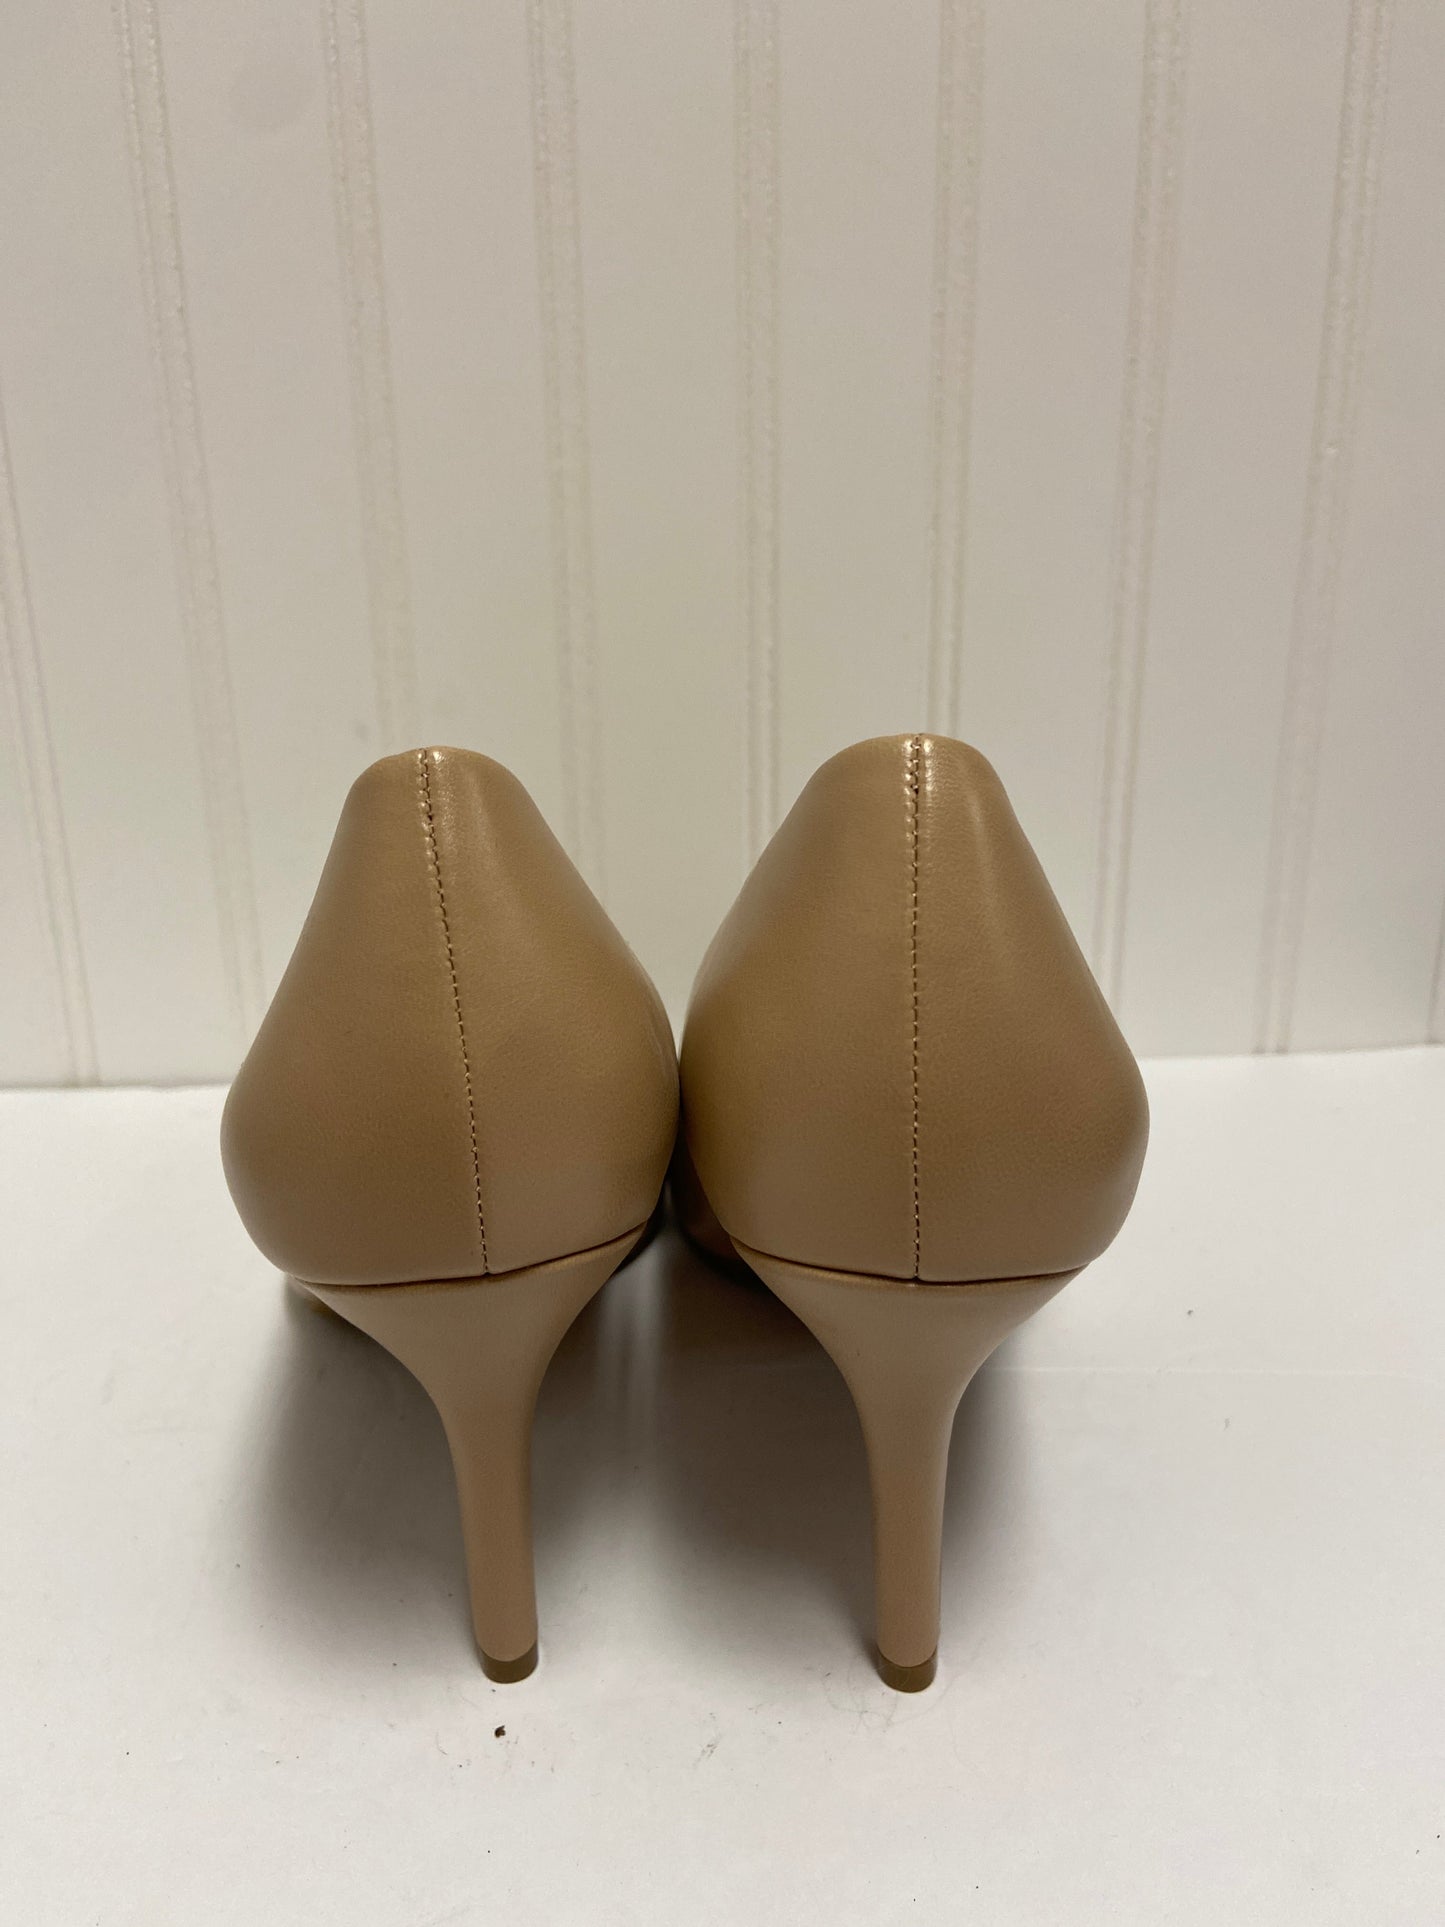 Shoes Heels Stiletto By Inc  Size: 9.5